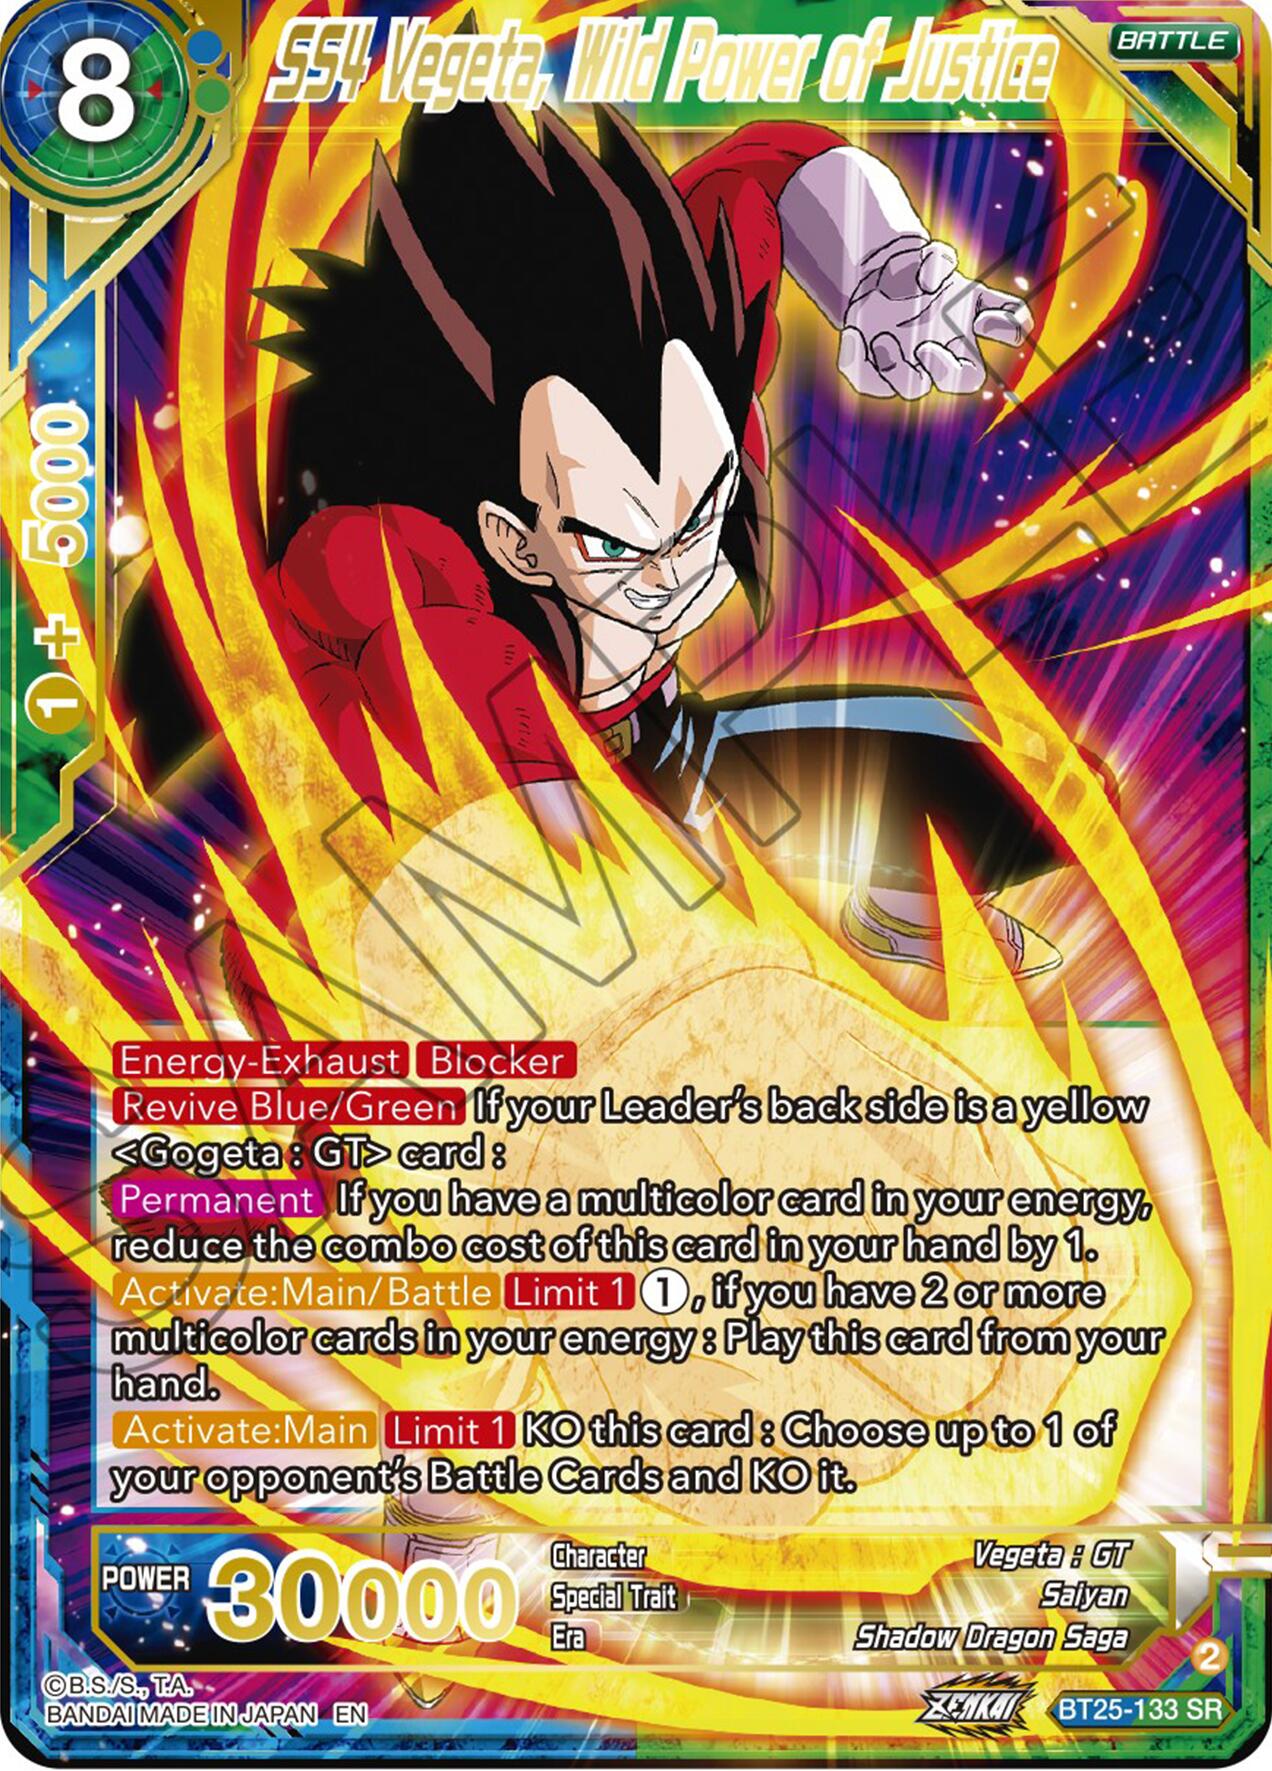 SS4 Vegeta, Wild Power of Justice (BT25-133) [Legend of the Dragon Balls] | Total Play